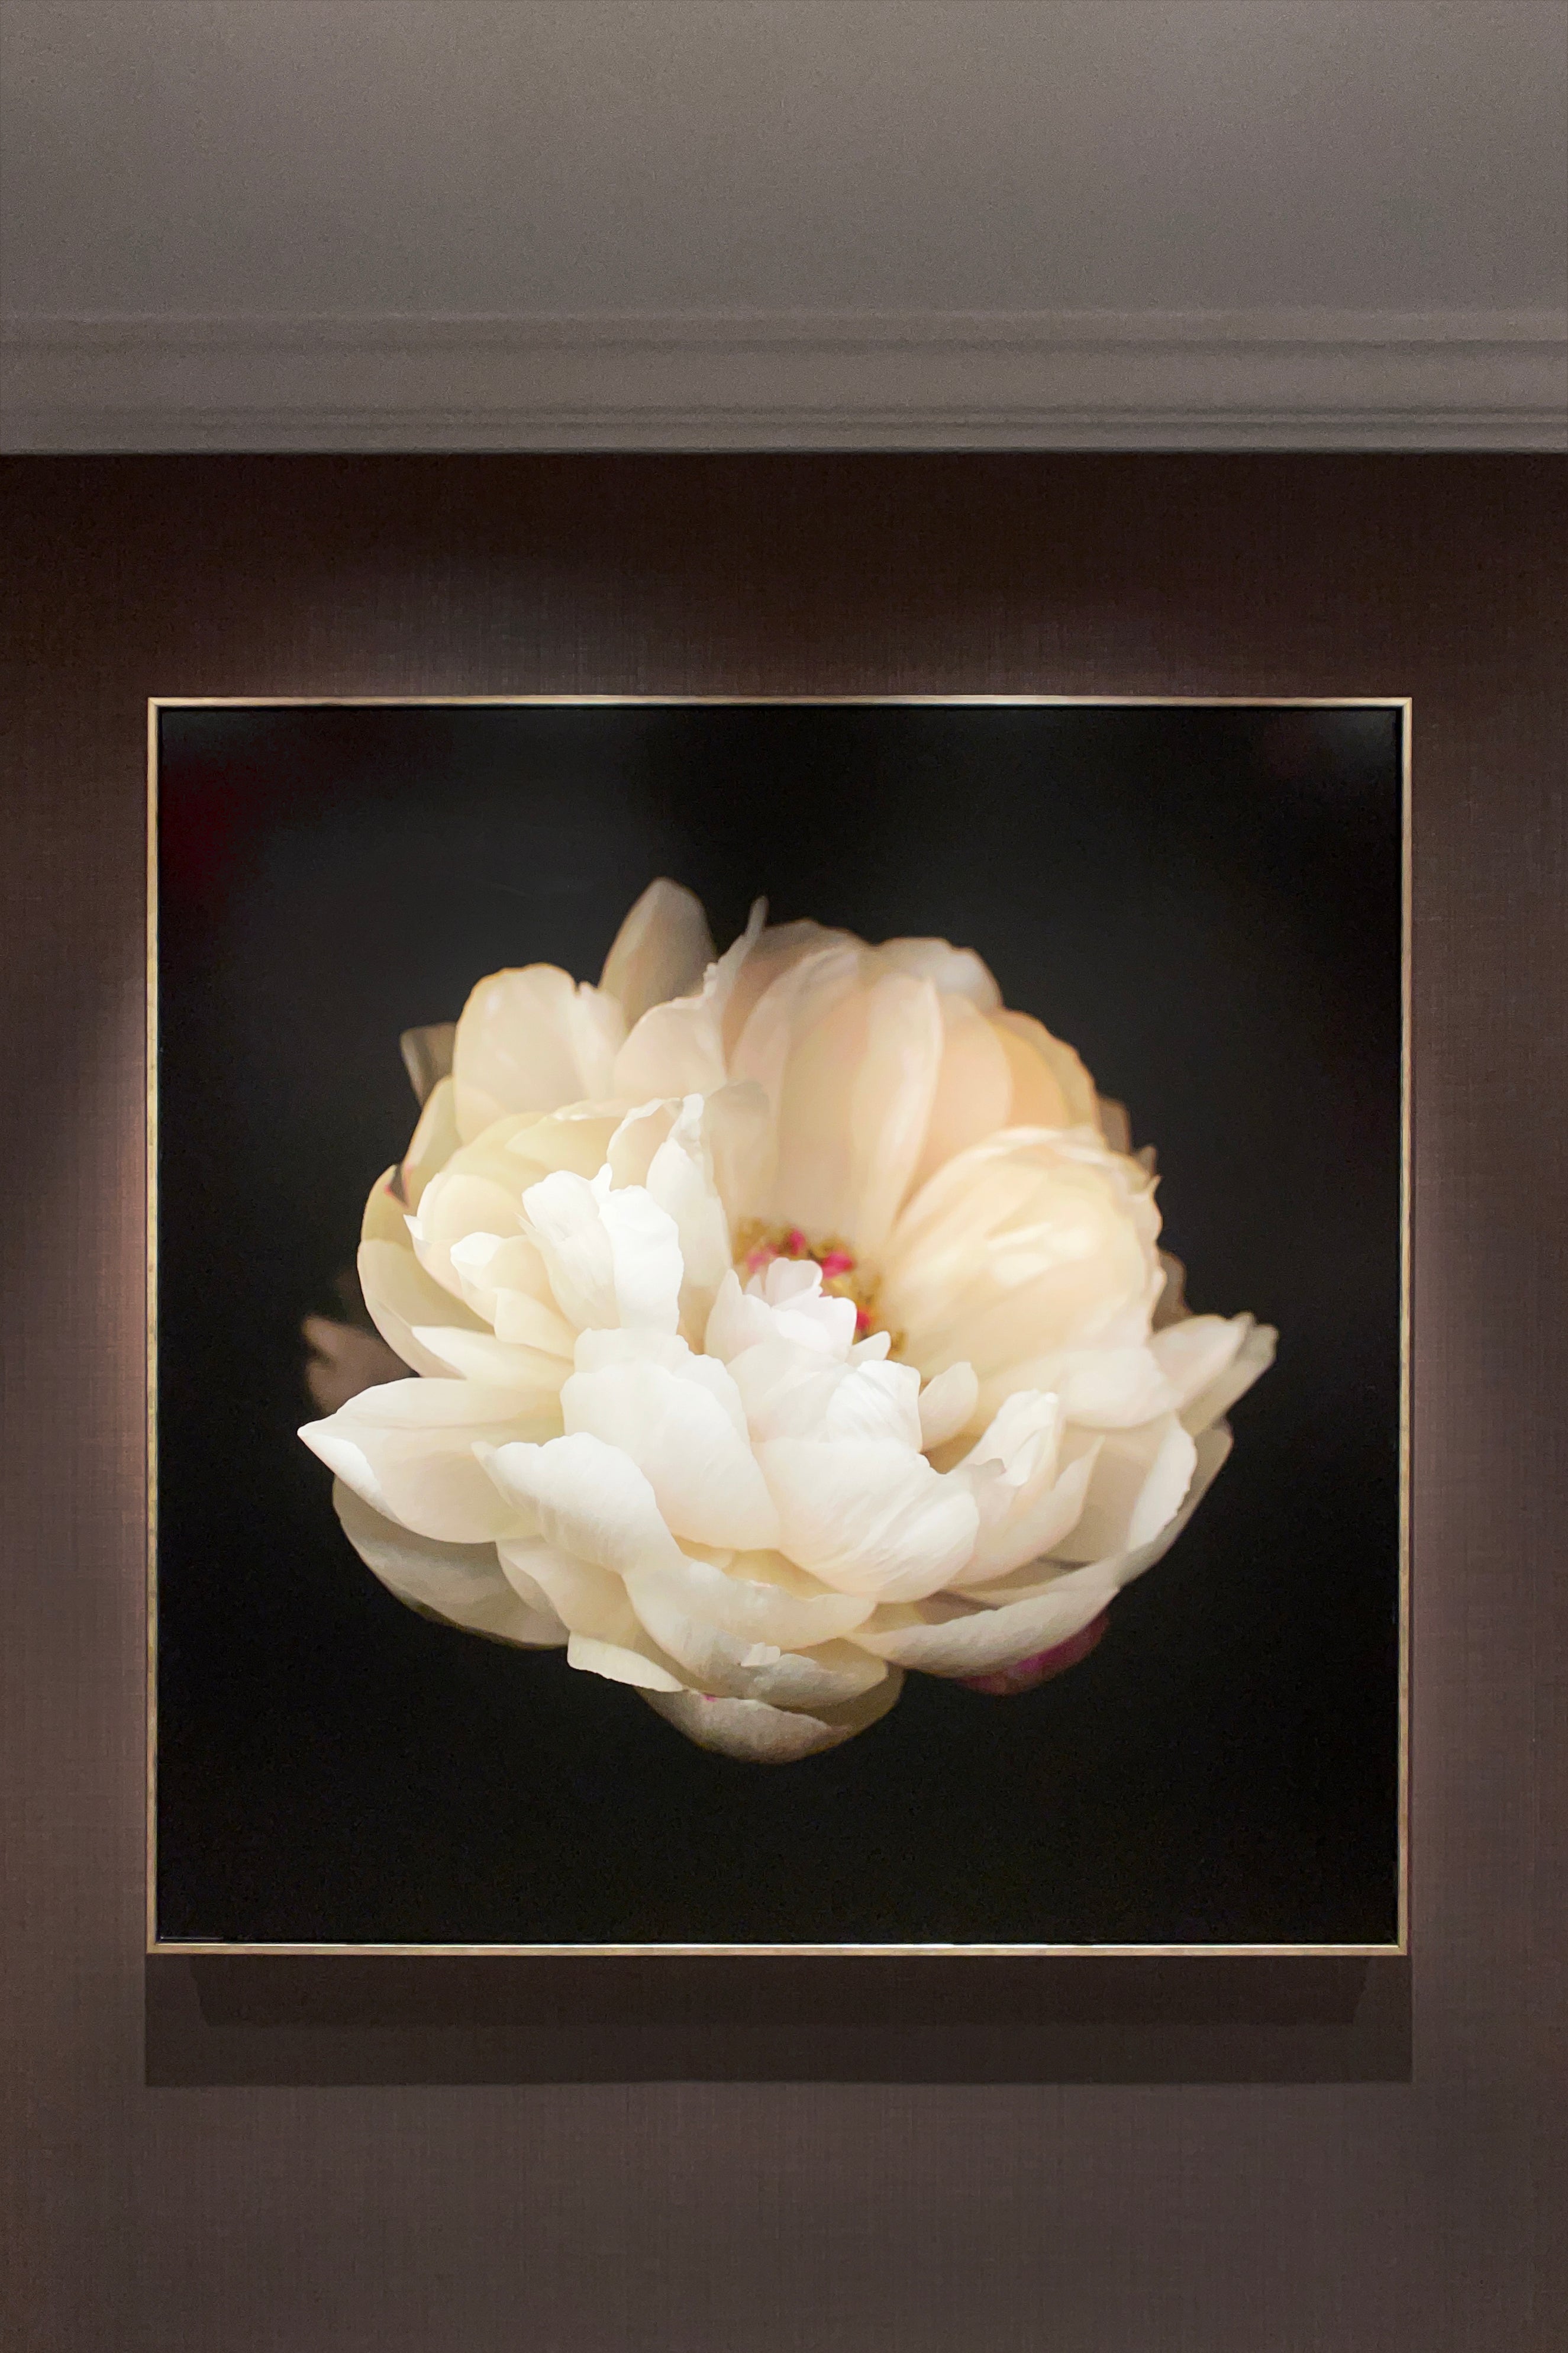 A framed photograph of a large white peony on a dark background by Doris Mitsch hangs on the wall.